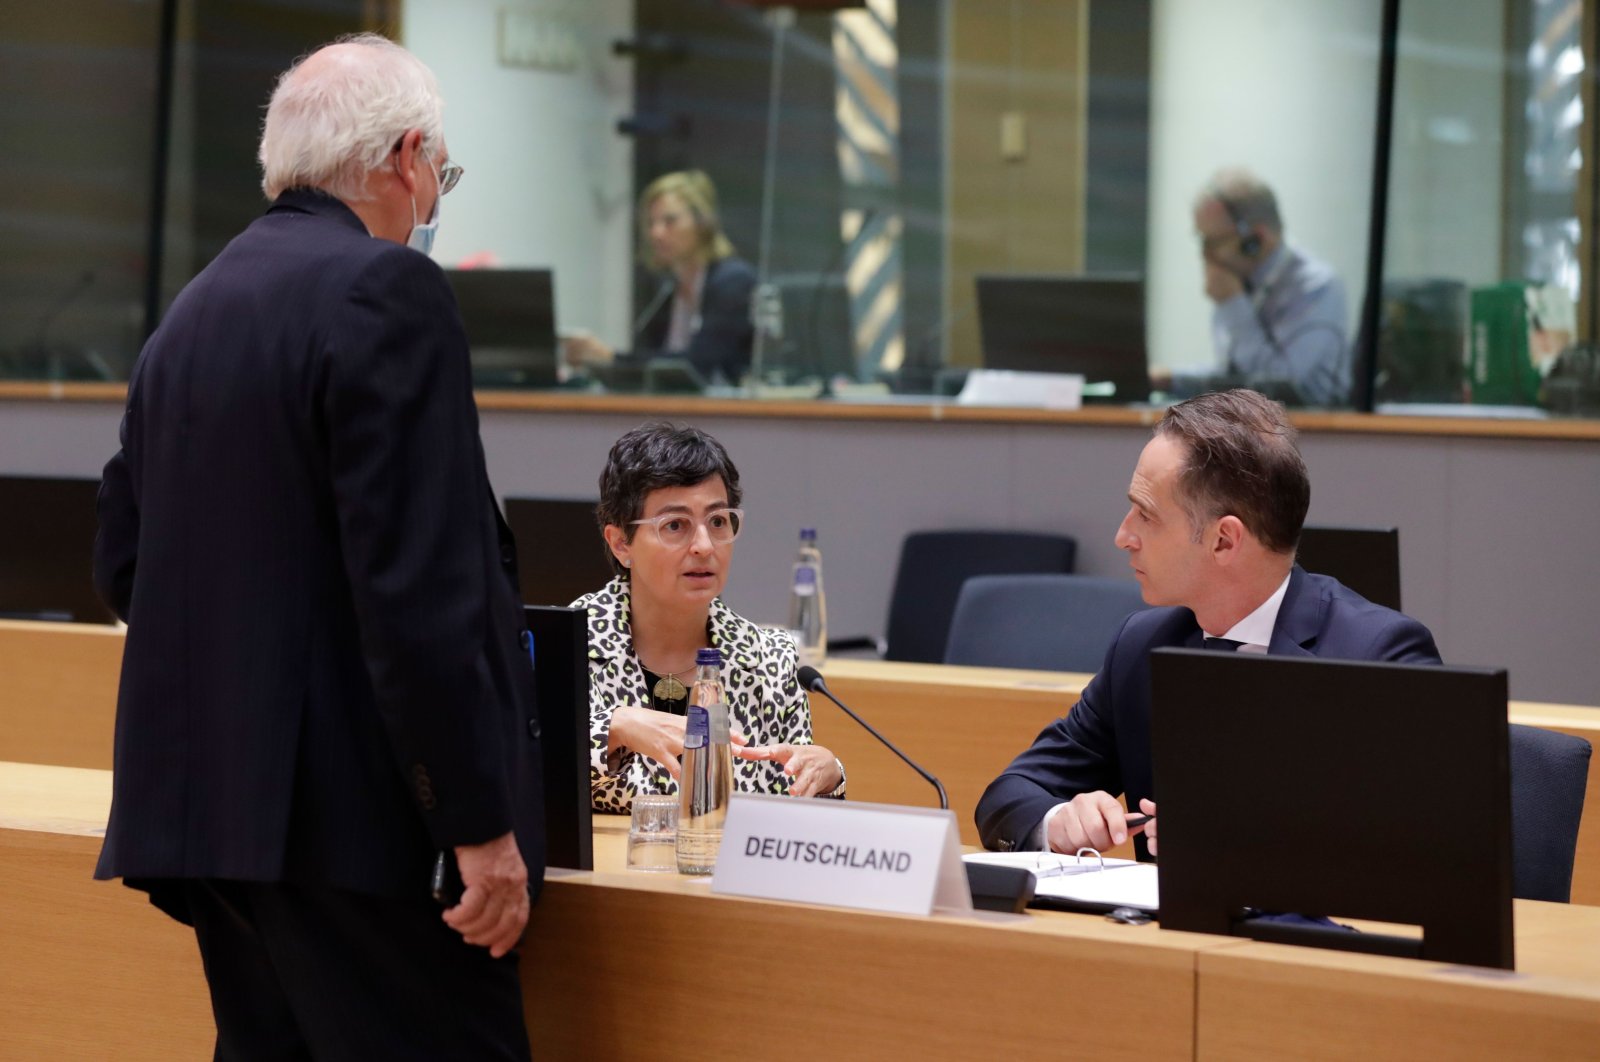 Josep Borrell (L), the European high representative of the Union for Foreign Affairs, chats with Spanish Foreign Minister Arancha Gonzalez Laya (C) and German Minister of Foreign Affairs Heiko Maas (R) during a Foreign Affairs Council meeting in Brussels, Belgium, Sept. 21, 2020. (AFP Photo)